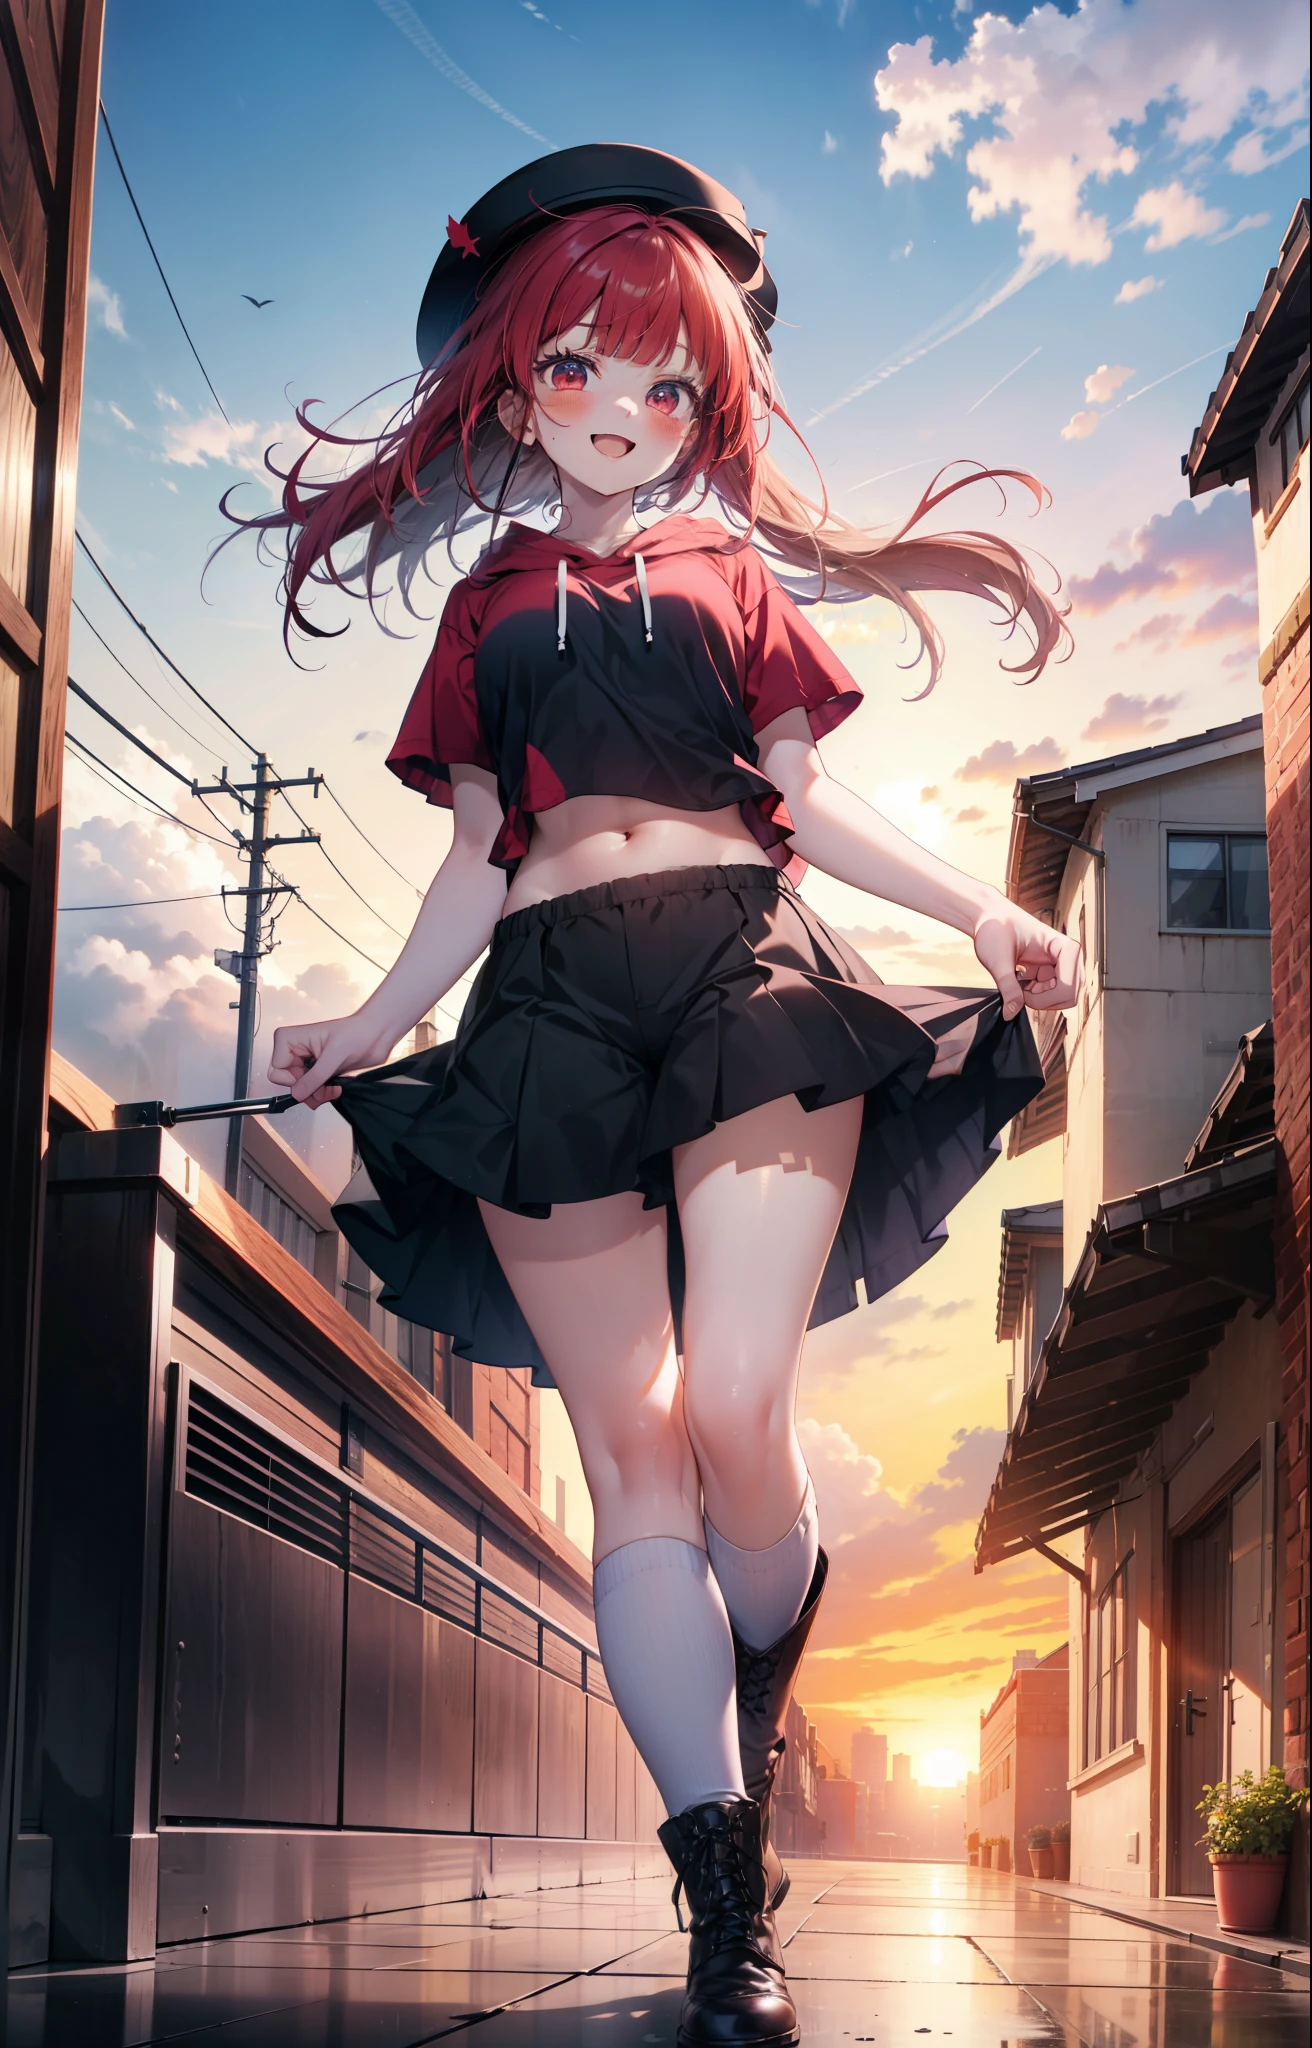 Arima etc., Arima Kana, (Red eyes:1.5), Long Hair,blush,happy smile, smile, Open your mouth,Redhead,Applejack Hat,Red Tank Top Shirt,Black hoodie,Short sleeve,The front is free,Shorts,Black knee socks,short boots,Looking up from below,whole bodyがイラストに入るように,morning,morning陽,The sun is rising,Walking,
break looking at viewer,whole body,
break outdoors, In town,Building district,
break (masterpiece:1.2), highest quality, High resolution, unity 8k wallpaper, (shape:0.8), (Beautiful and beautiful eyes:1.6), Highly detailed face, Perfect lighting, Highly detailed CG, (Perfect hands, Perfect Anatomy),